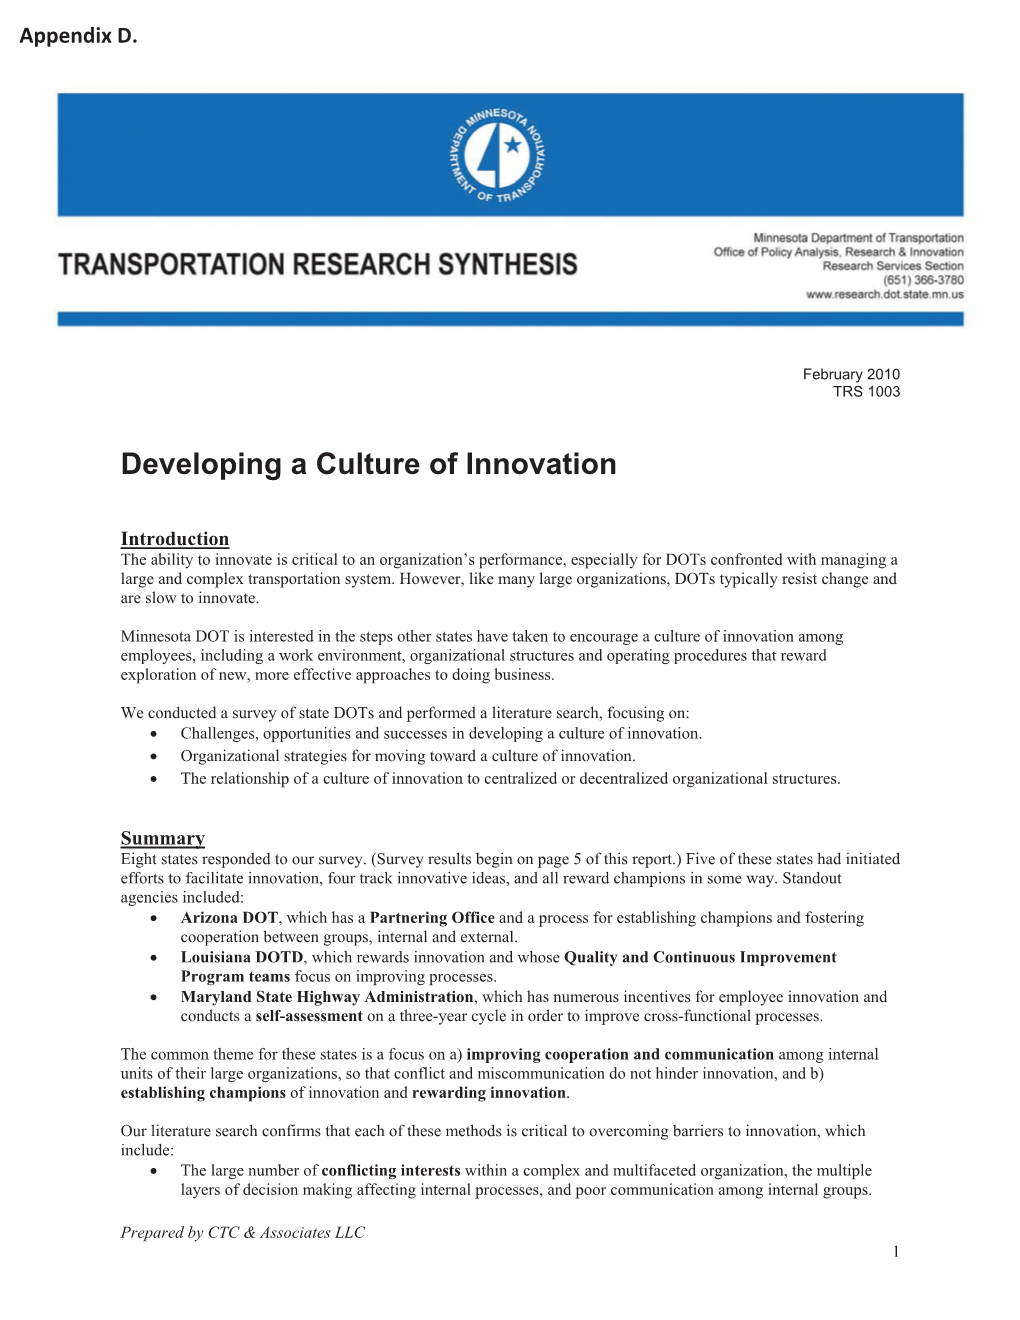 Developing a Culture of Innovation